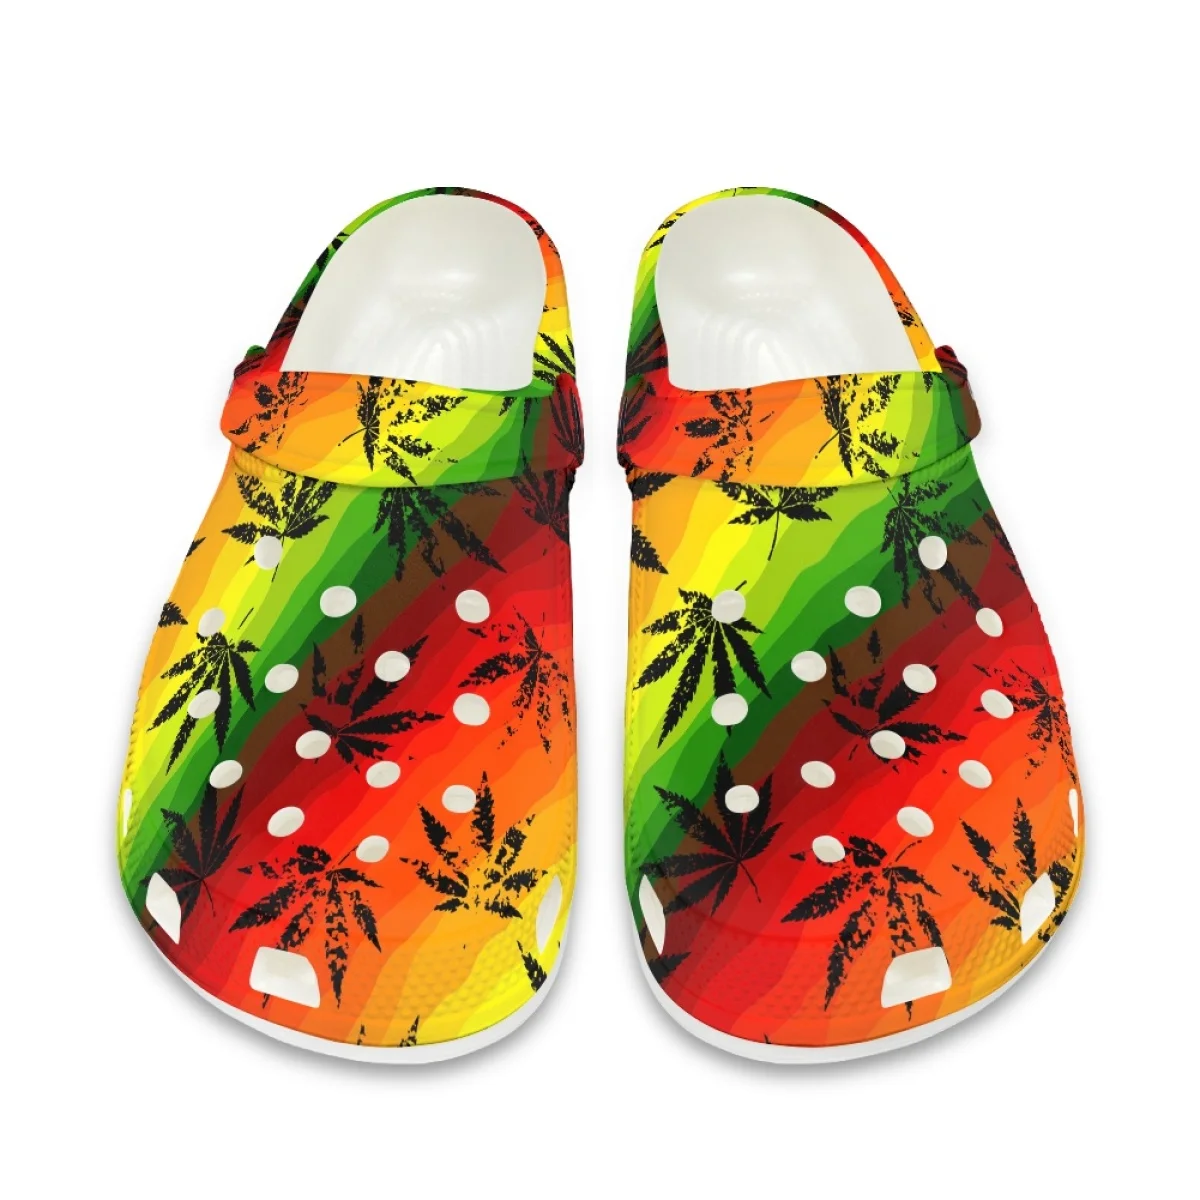 

Gradien Color Maple Leaf Creative Printed New Fashion Women Sandals Flats Basketball Boys Sports Shoes Breathable Slippers Gifts